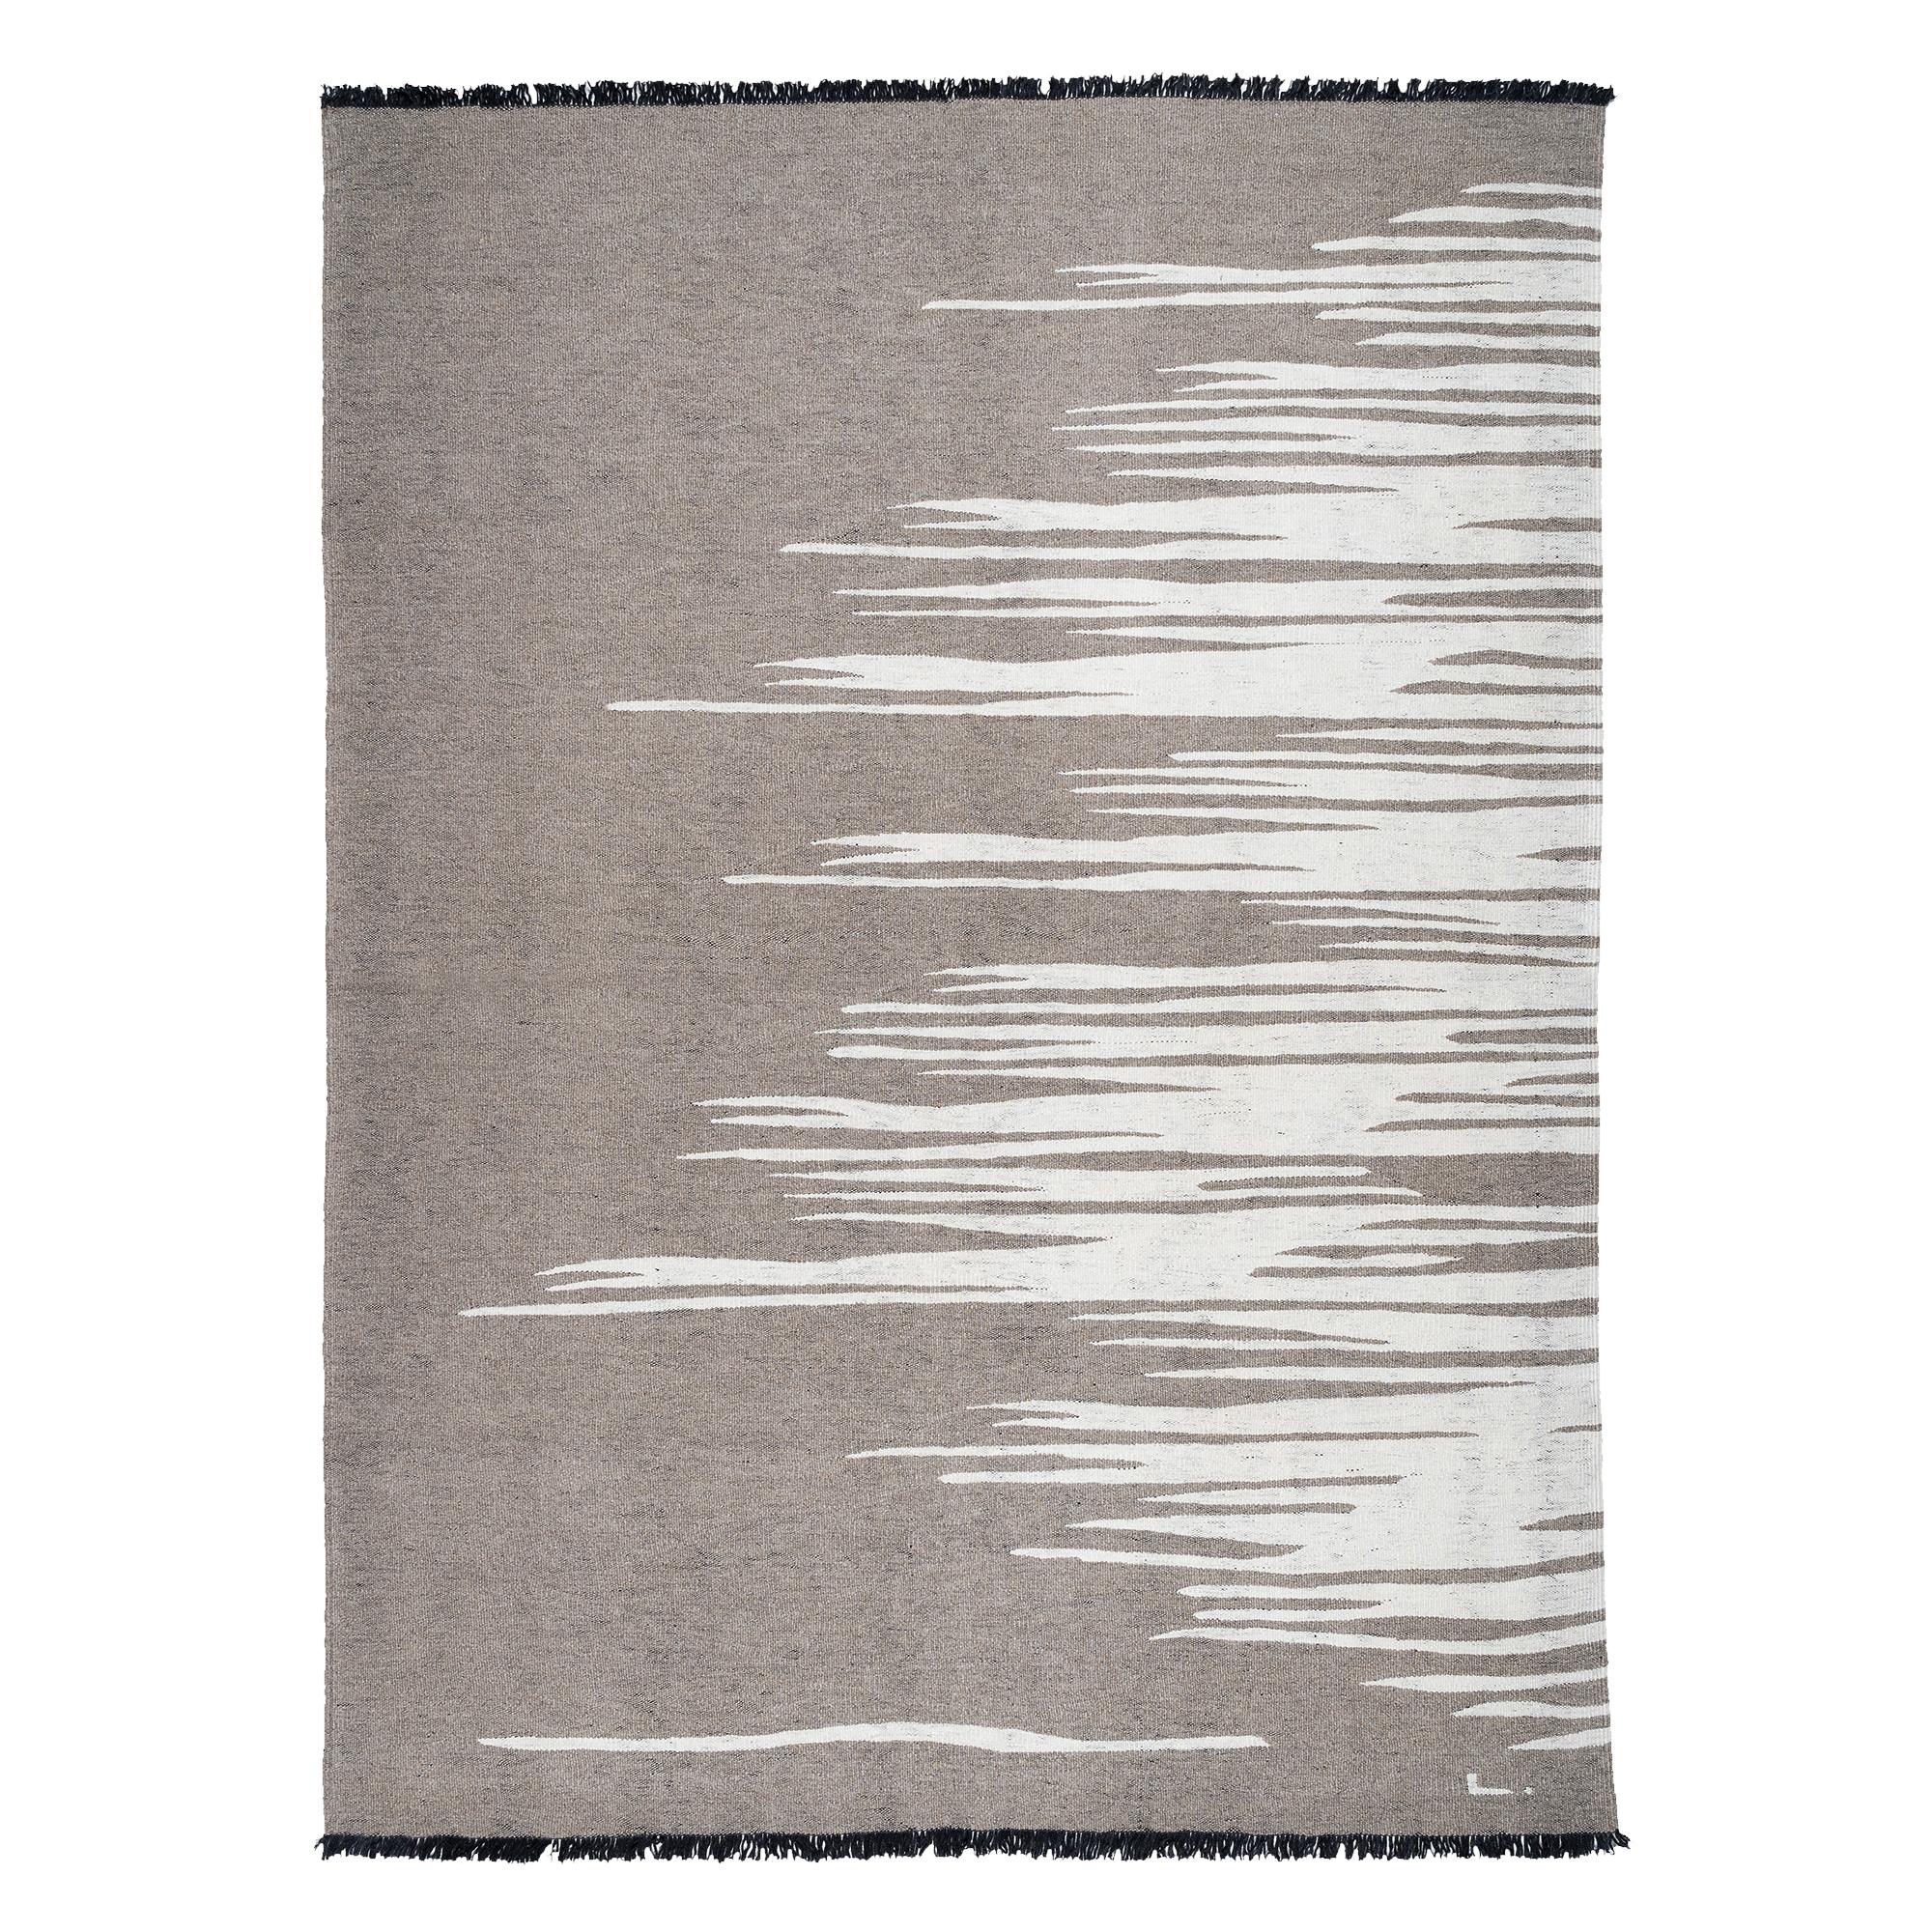 Ege No 3 Contemporary Kilim Rug, Wool Handwoven Dune White and Earthy Gray For Sale 1